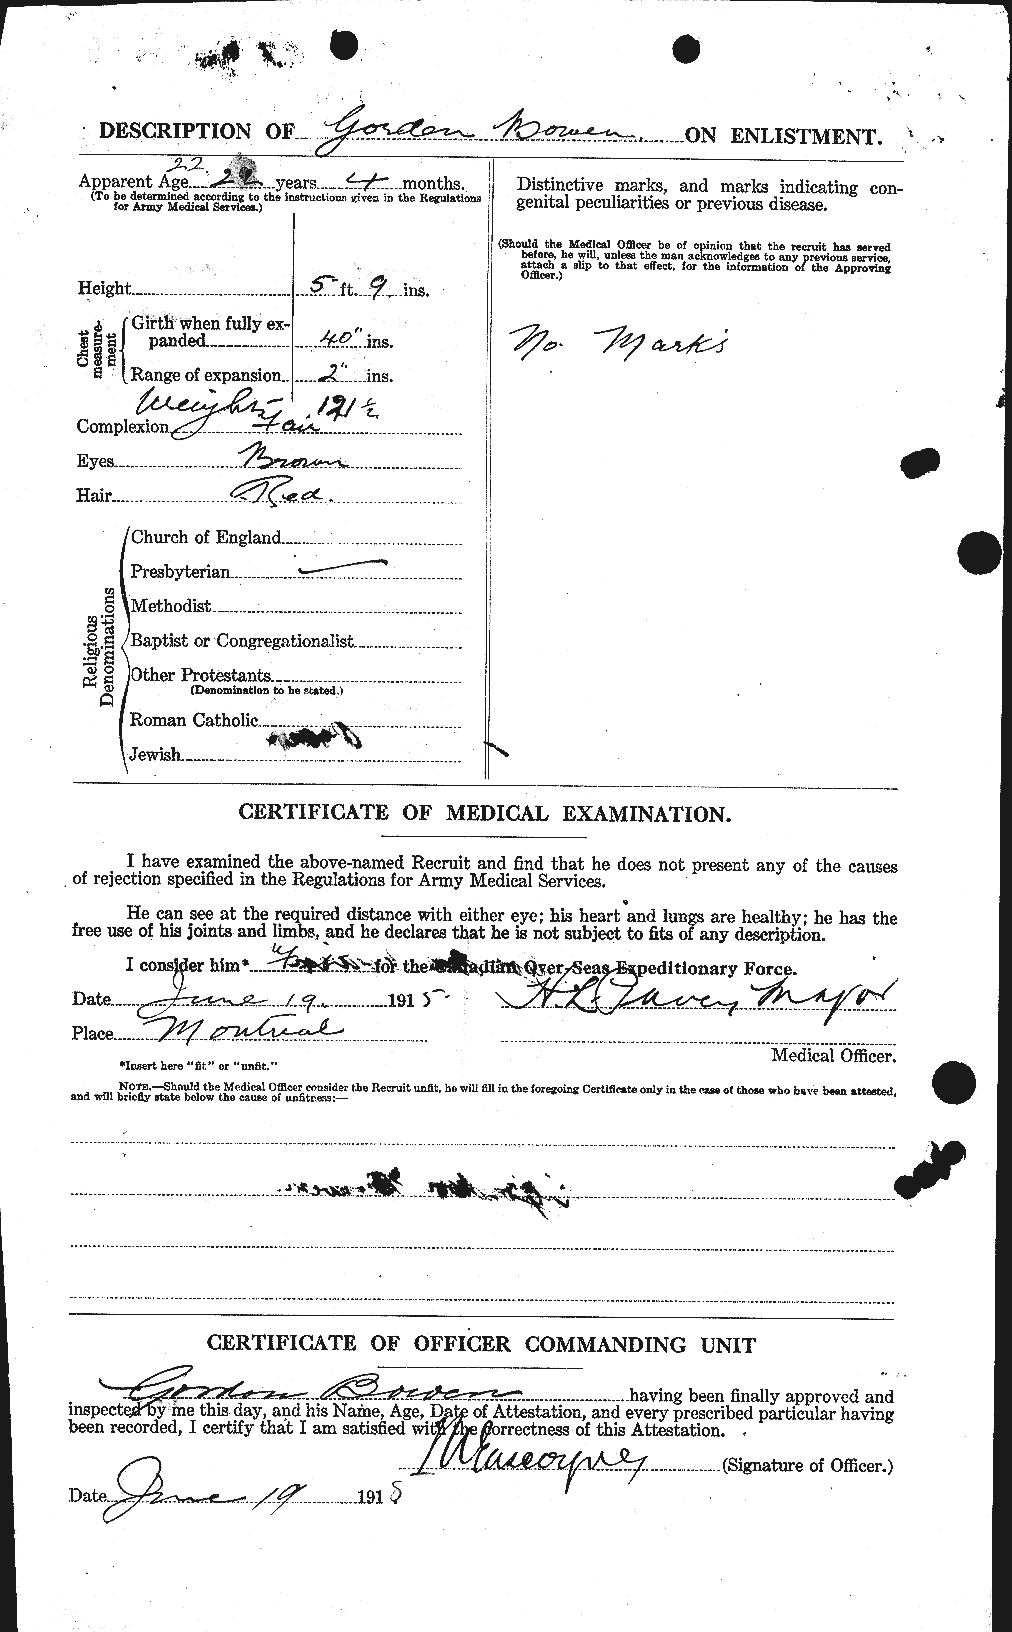 Personnel Records of the First World War - CEF 255405b